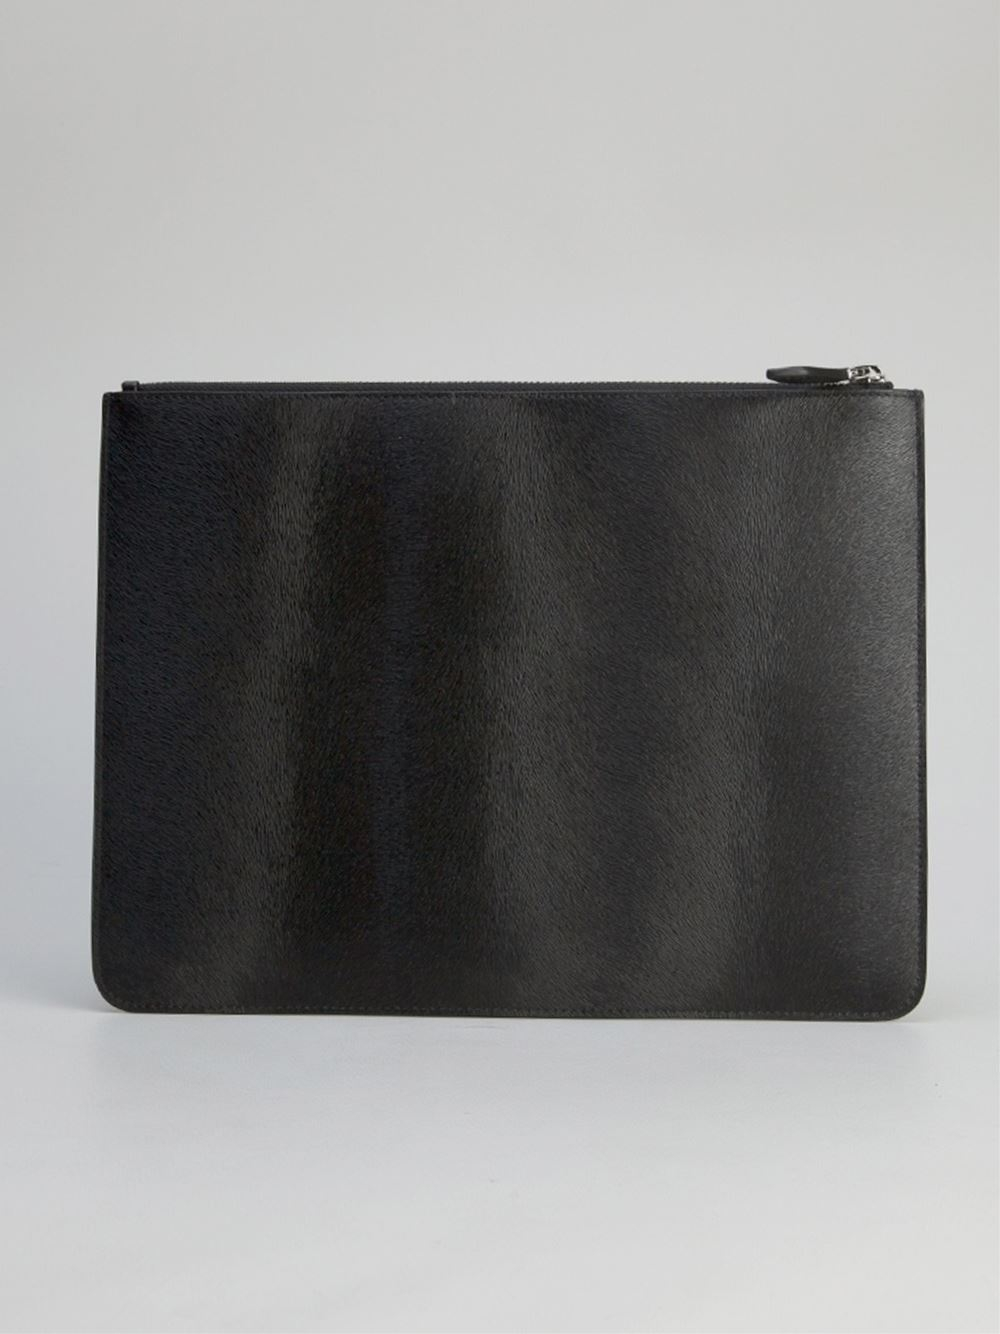 Givenchy Large Classic Slg Pouch in Black for Men - Lyst